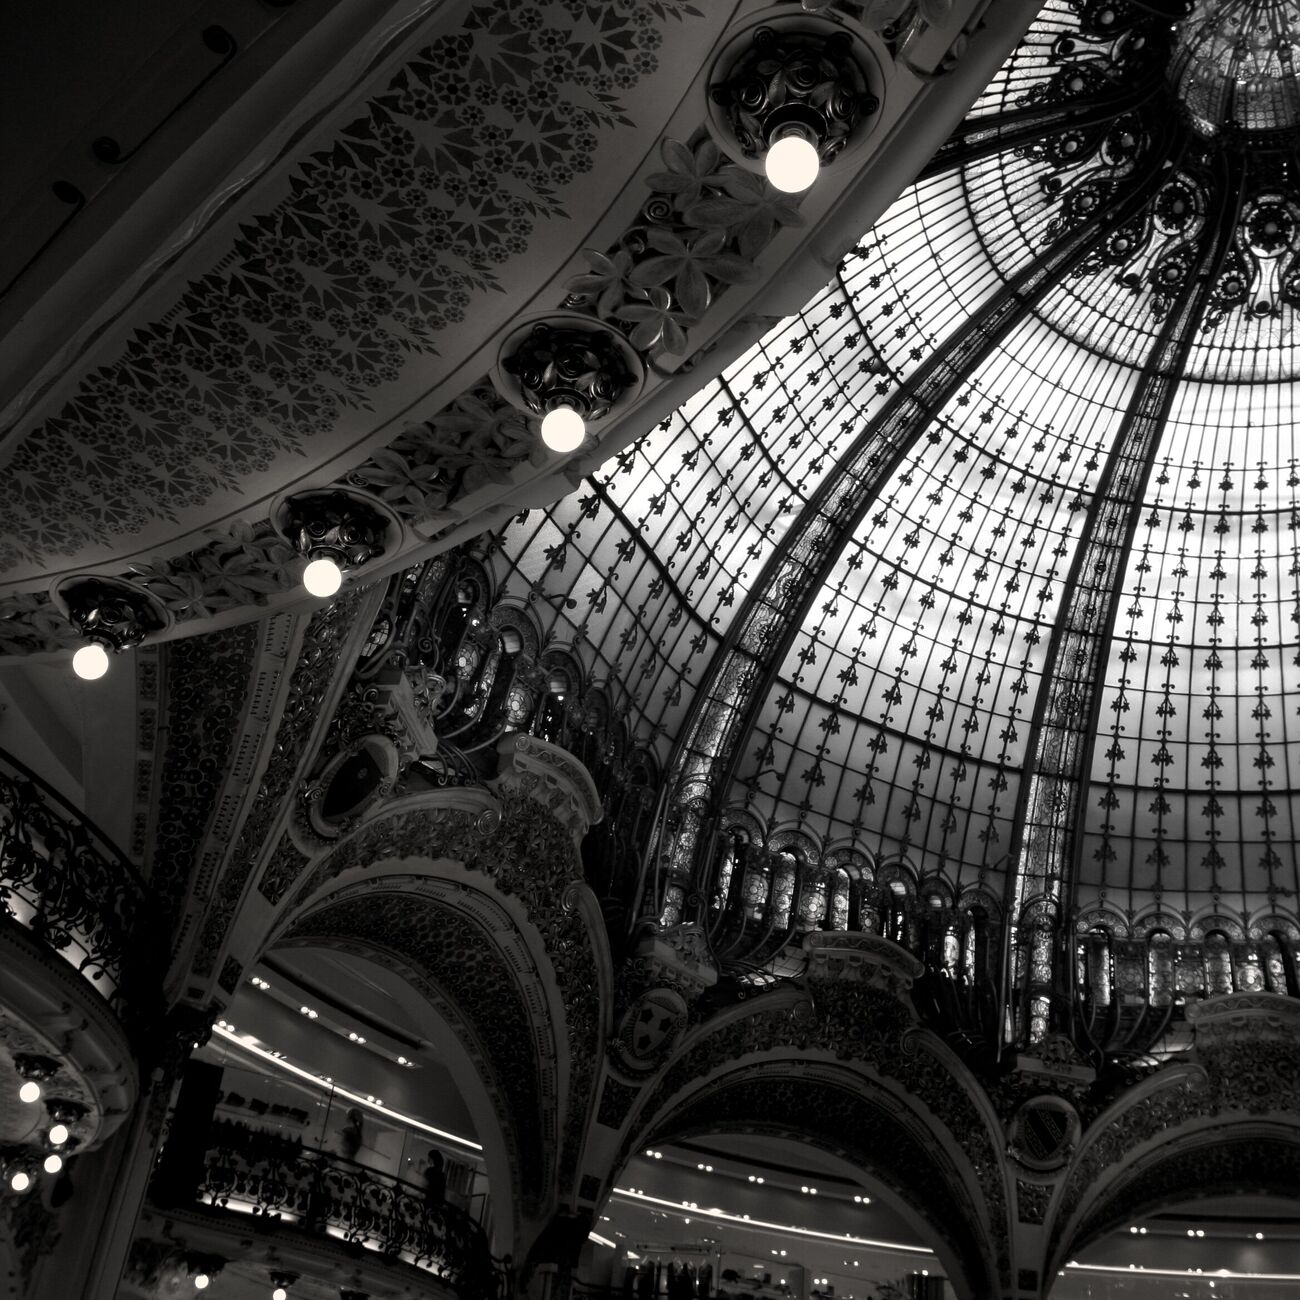 Get a 15.7 x 15.7 in, Galeries Lafayette. Ref-545-12 - Denis Olivier Art Photography